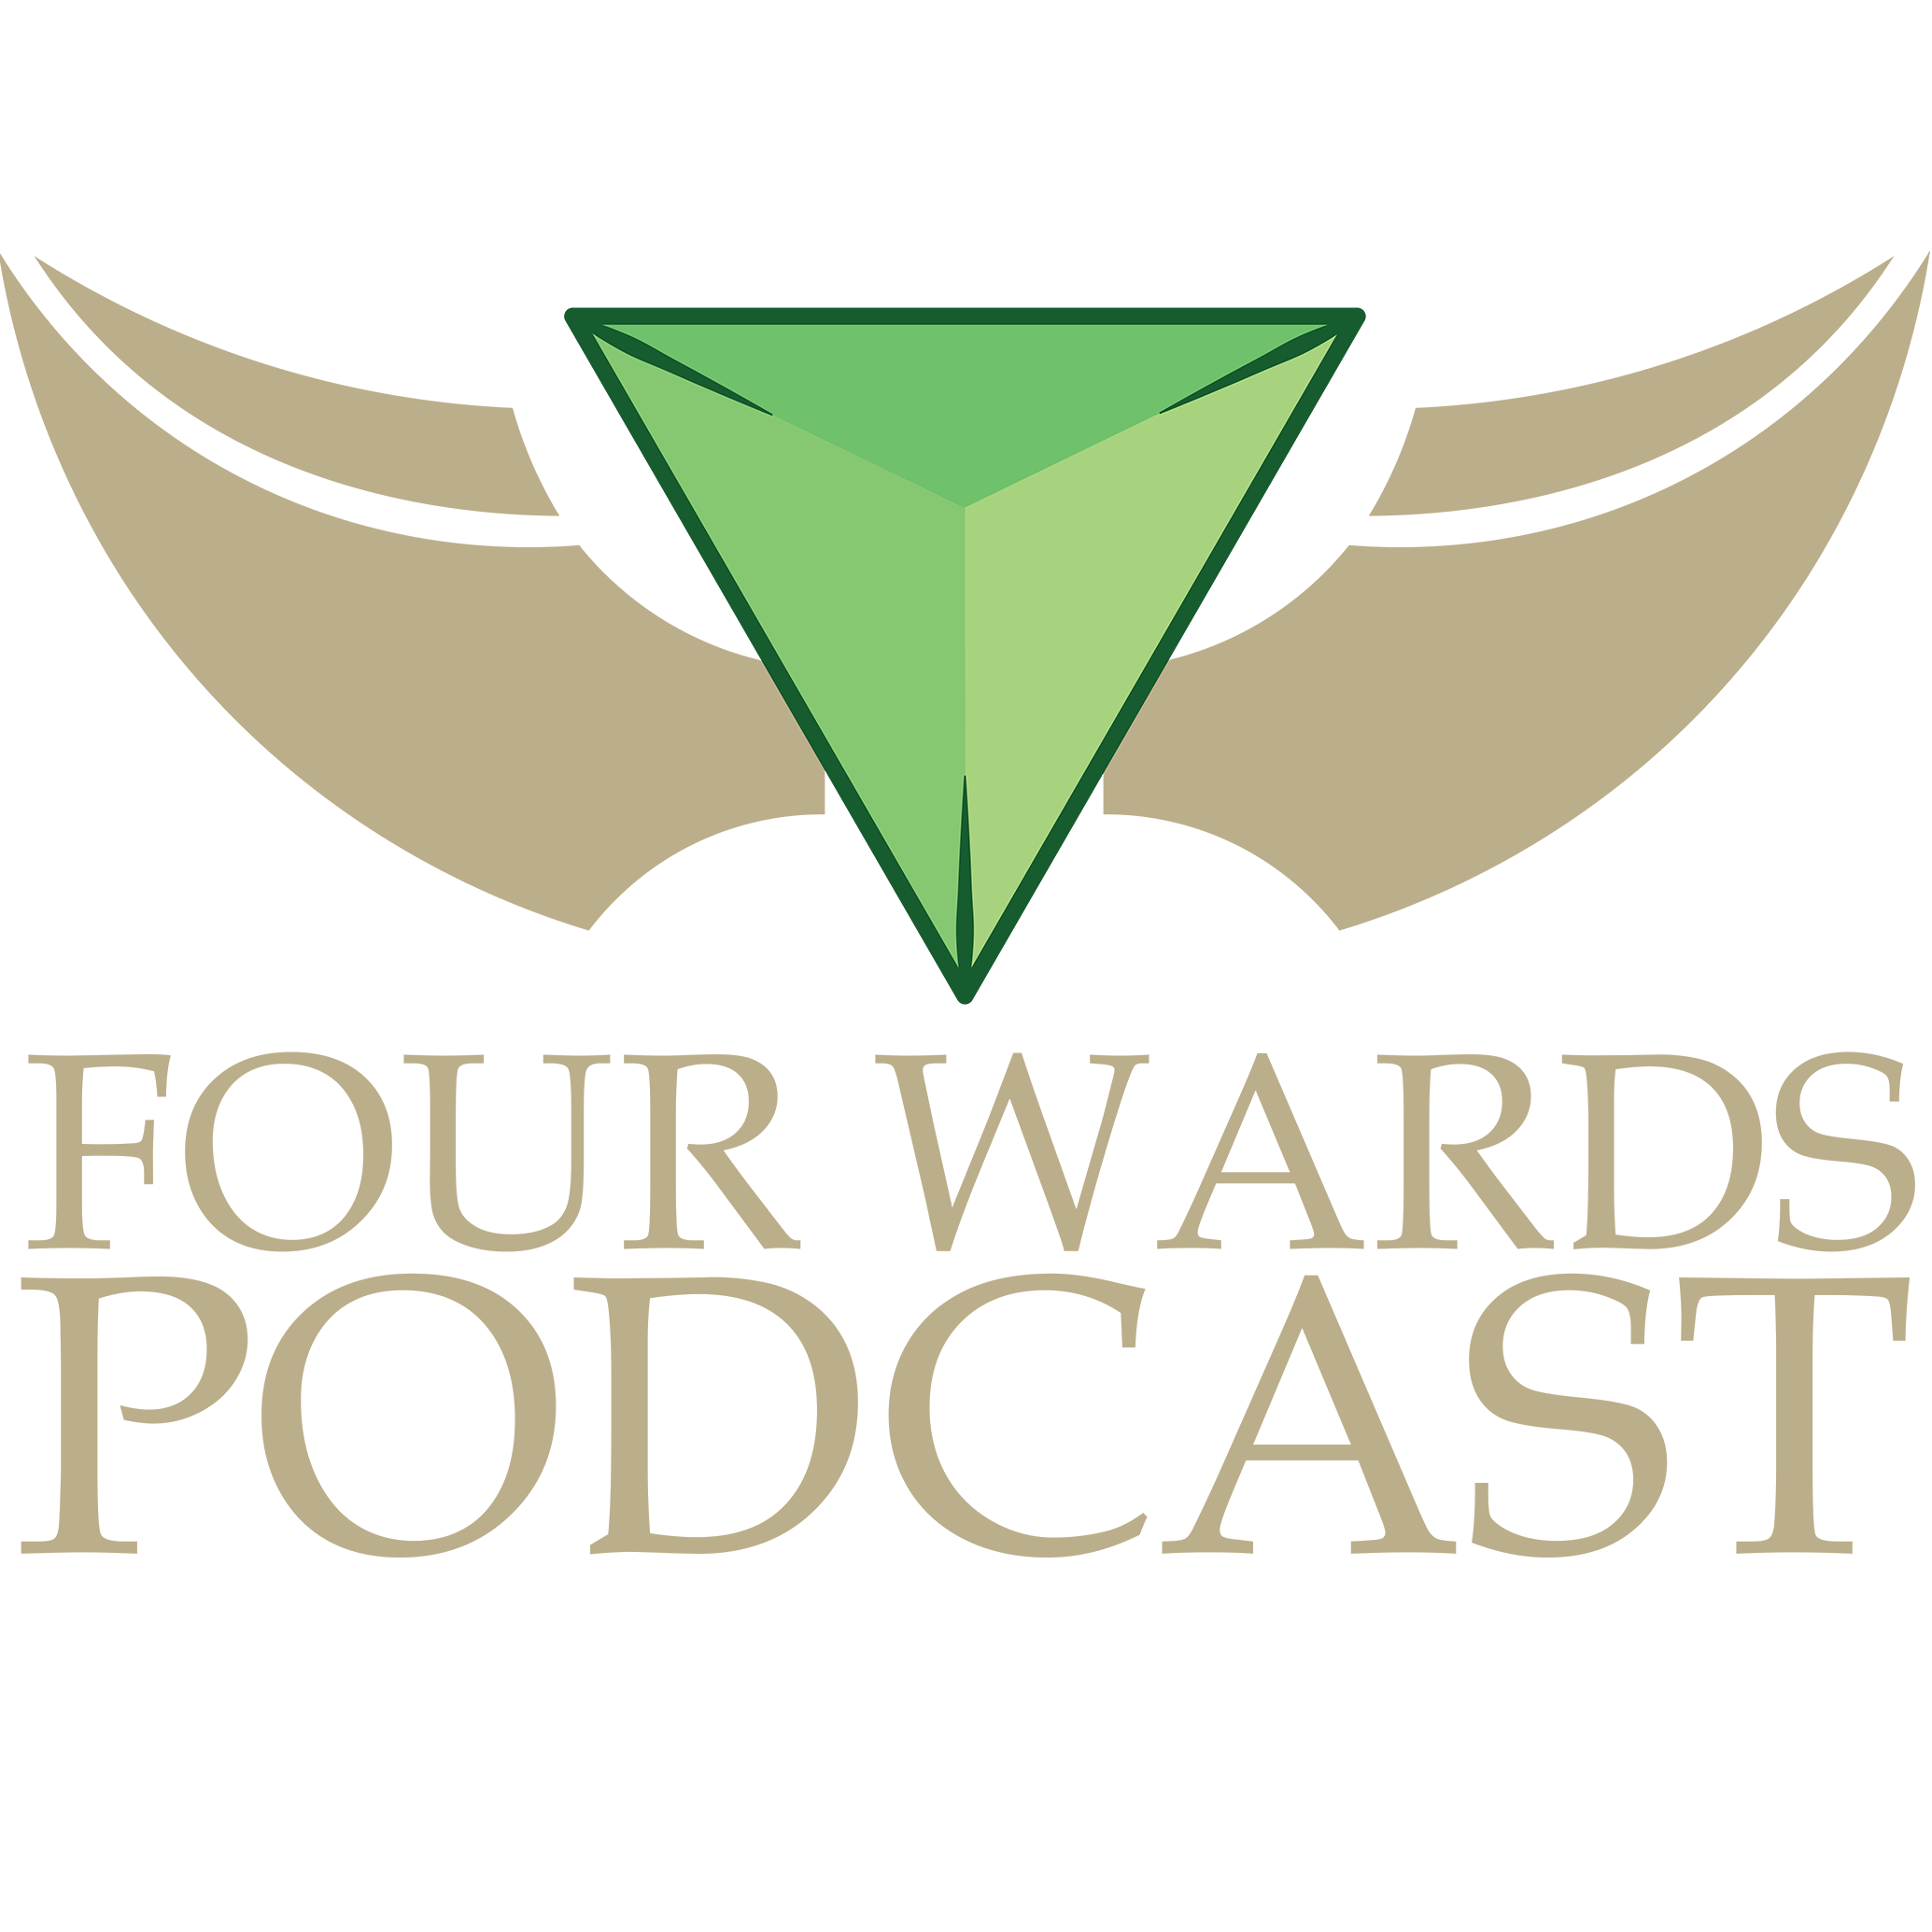 The Four Wards Podcast - Episode 428: A True Artist Does Not Limit Themself